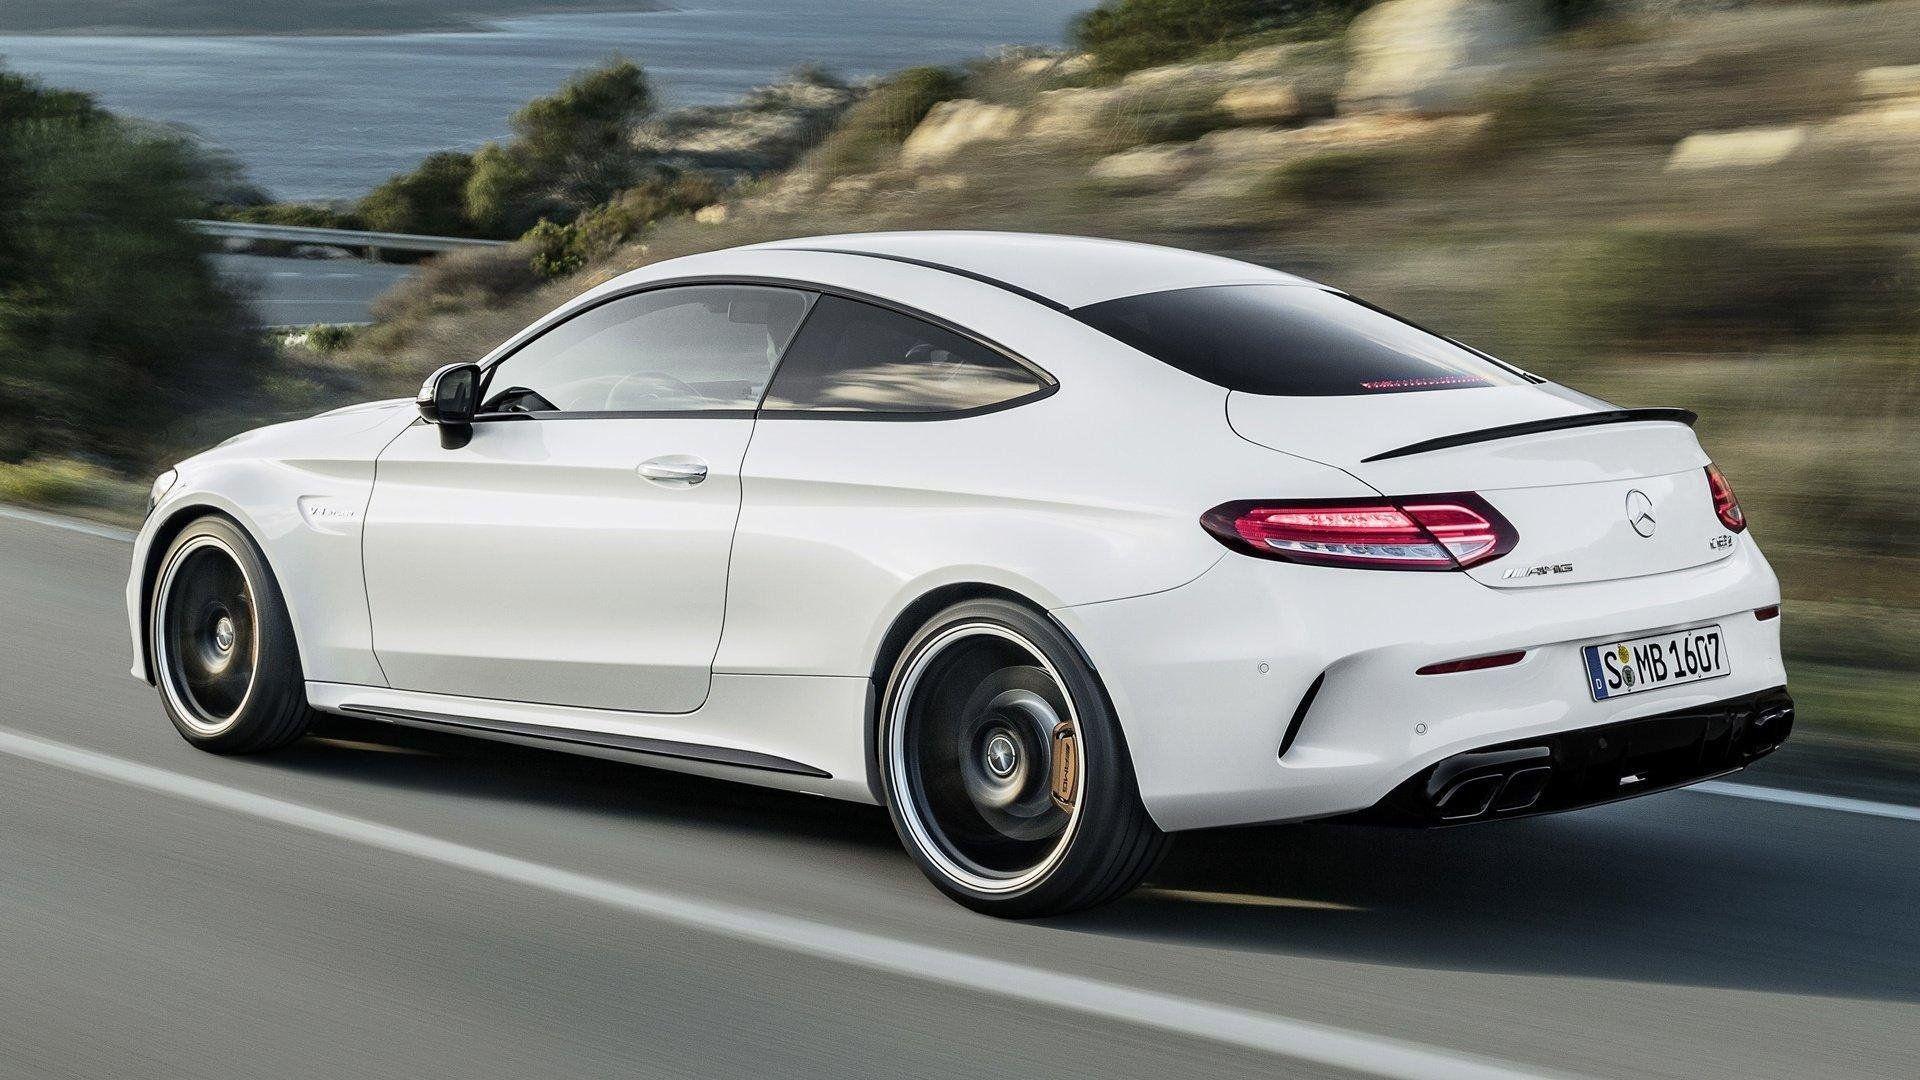 Family Car 2018 Mercedes AMG C 63 S Coupe HD Wallpaper For IPhone